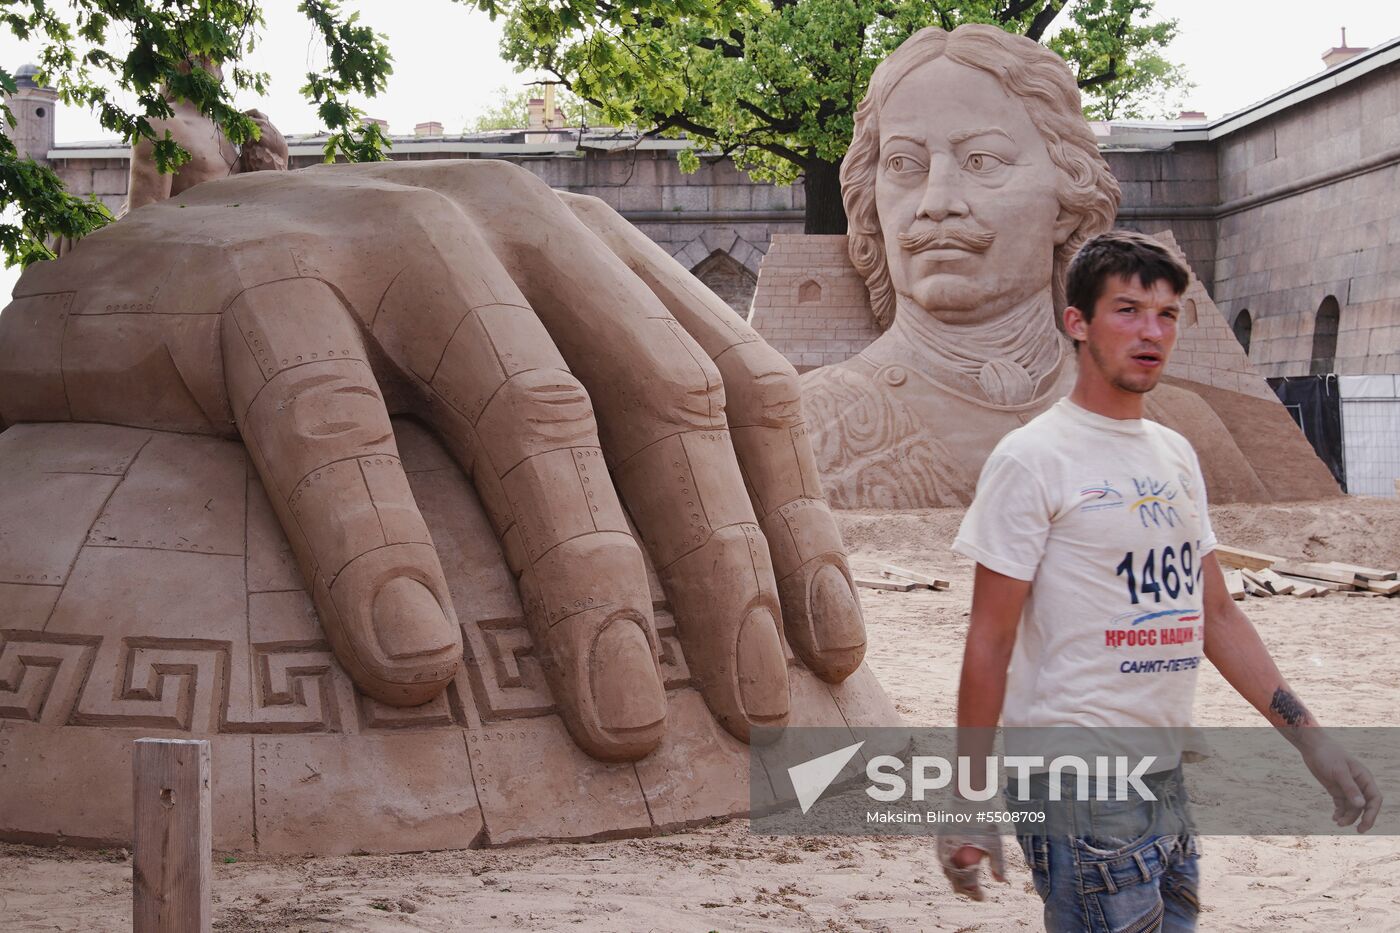 Preparations for opening of sand sculpture festival in St. Petersburg